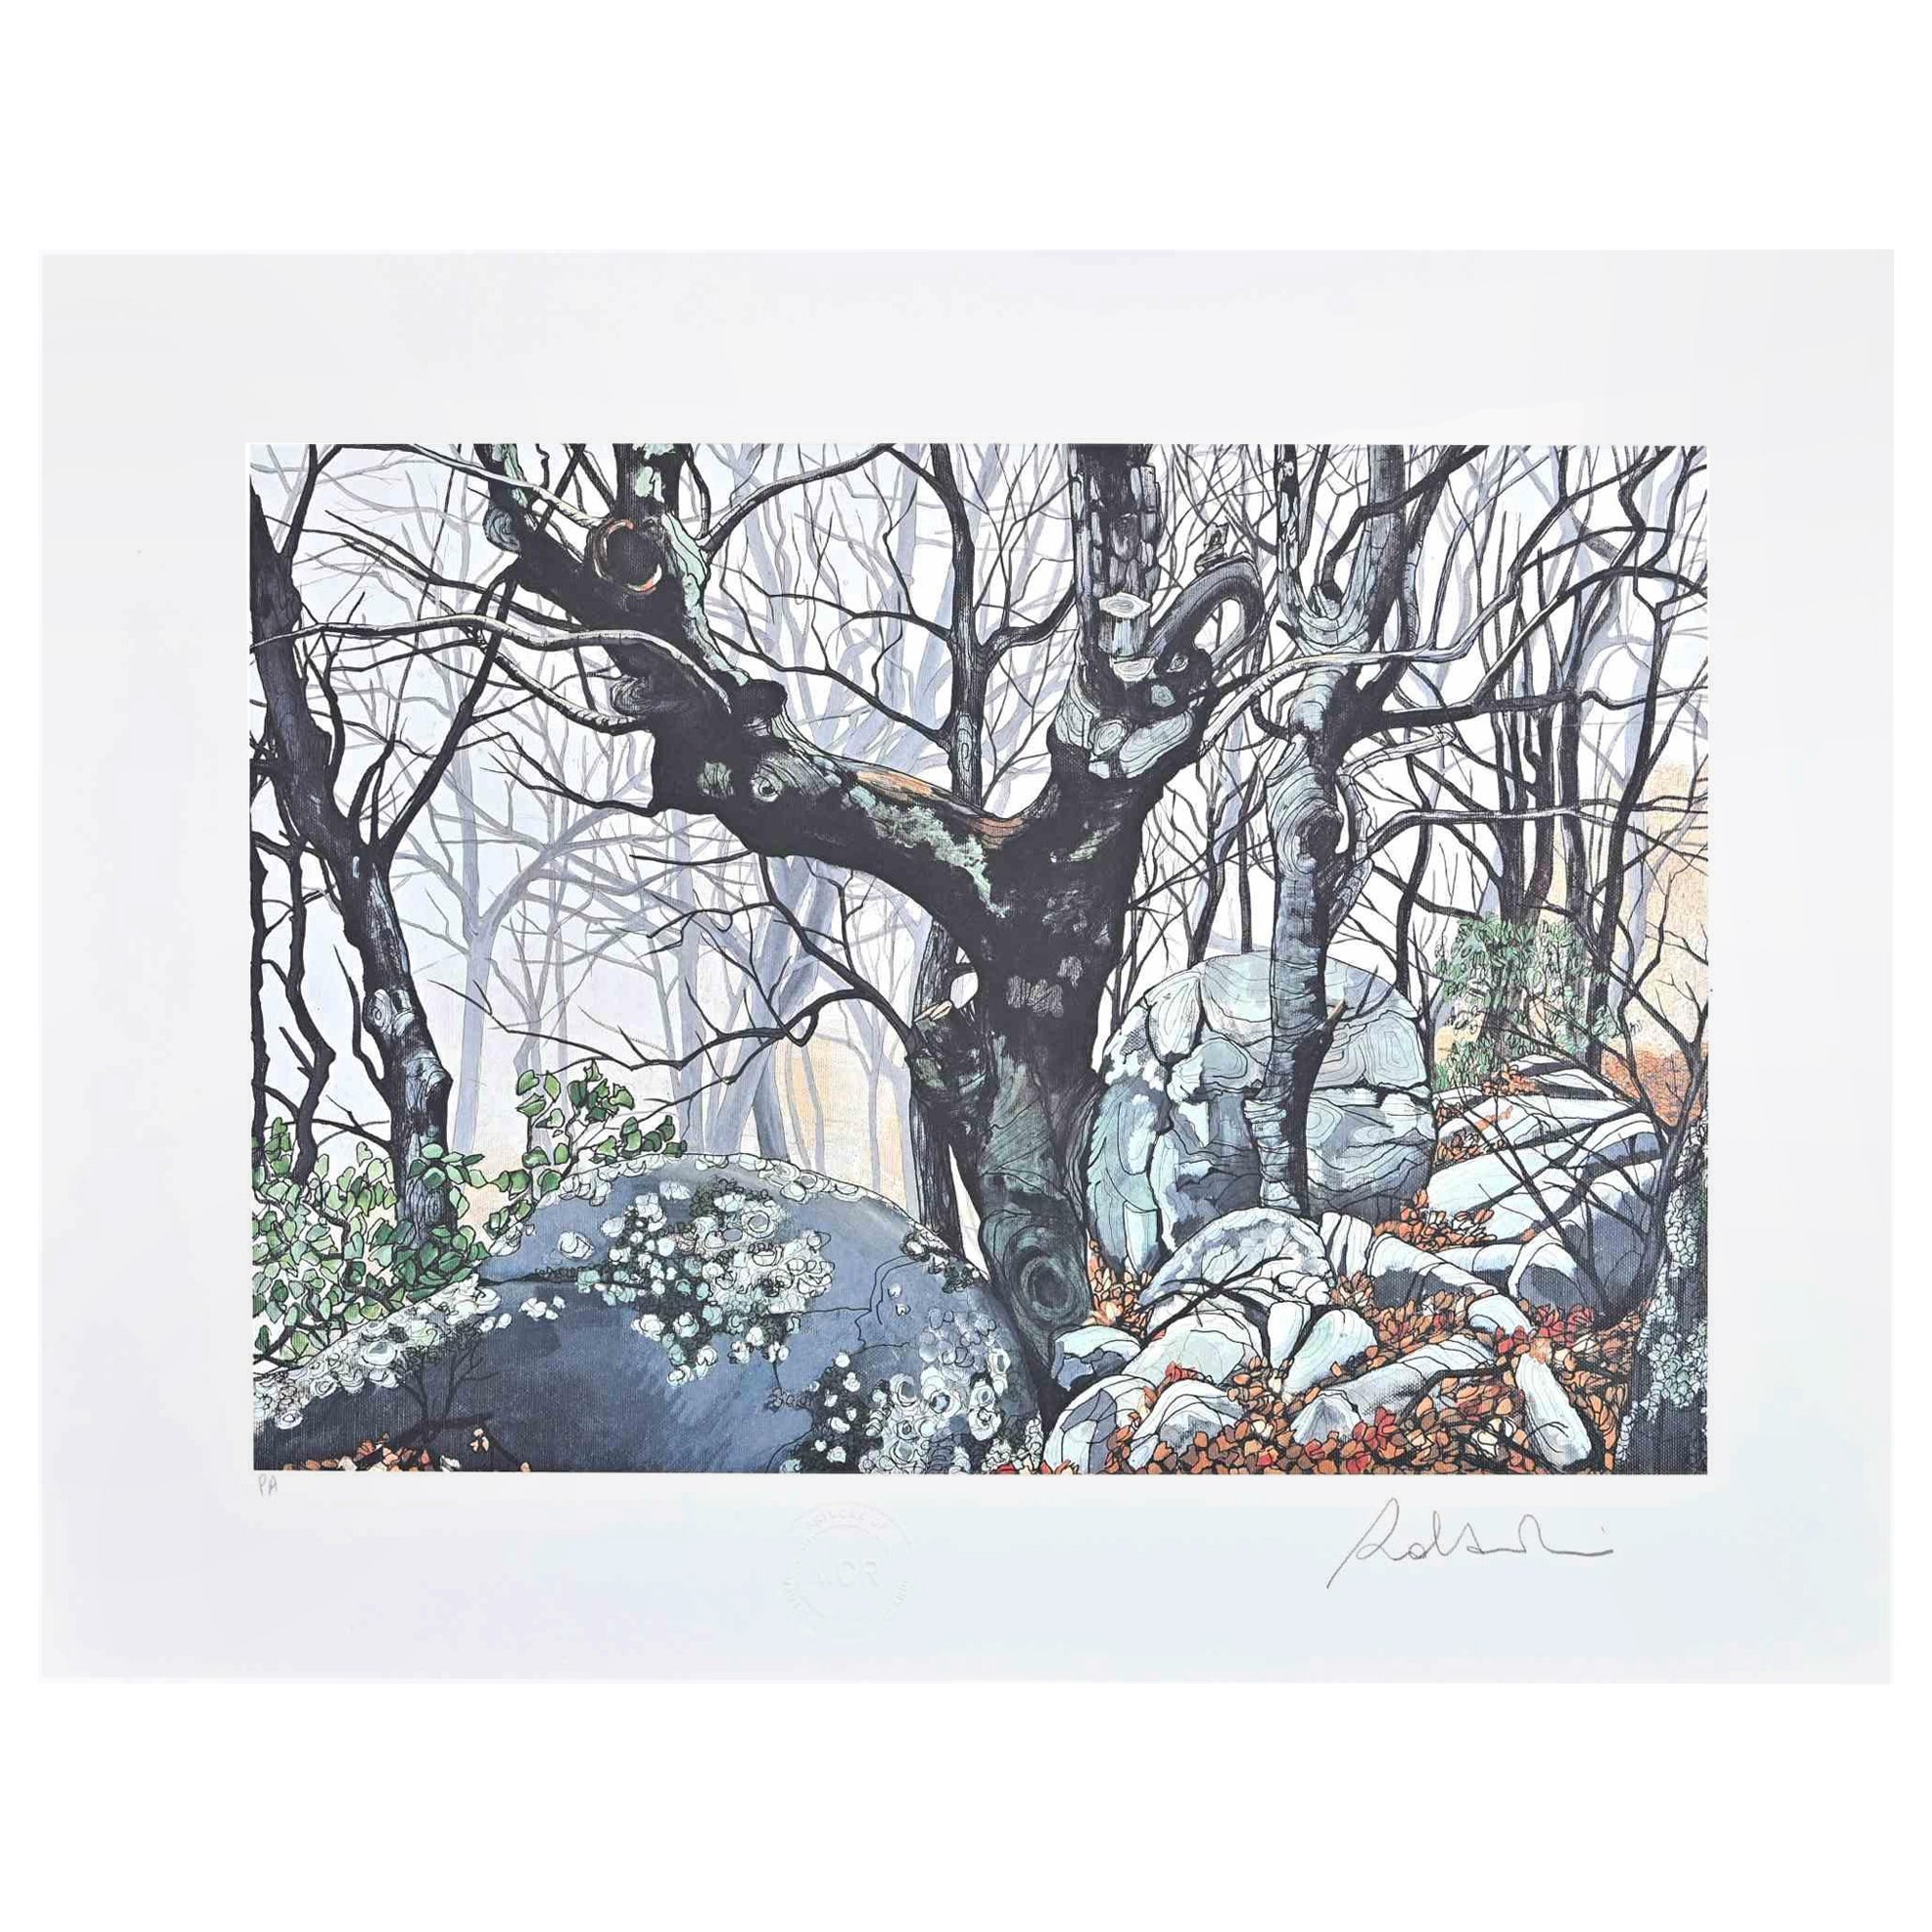 In the Forest - Original Screen Print by Rolandi - 1980s